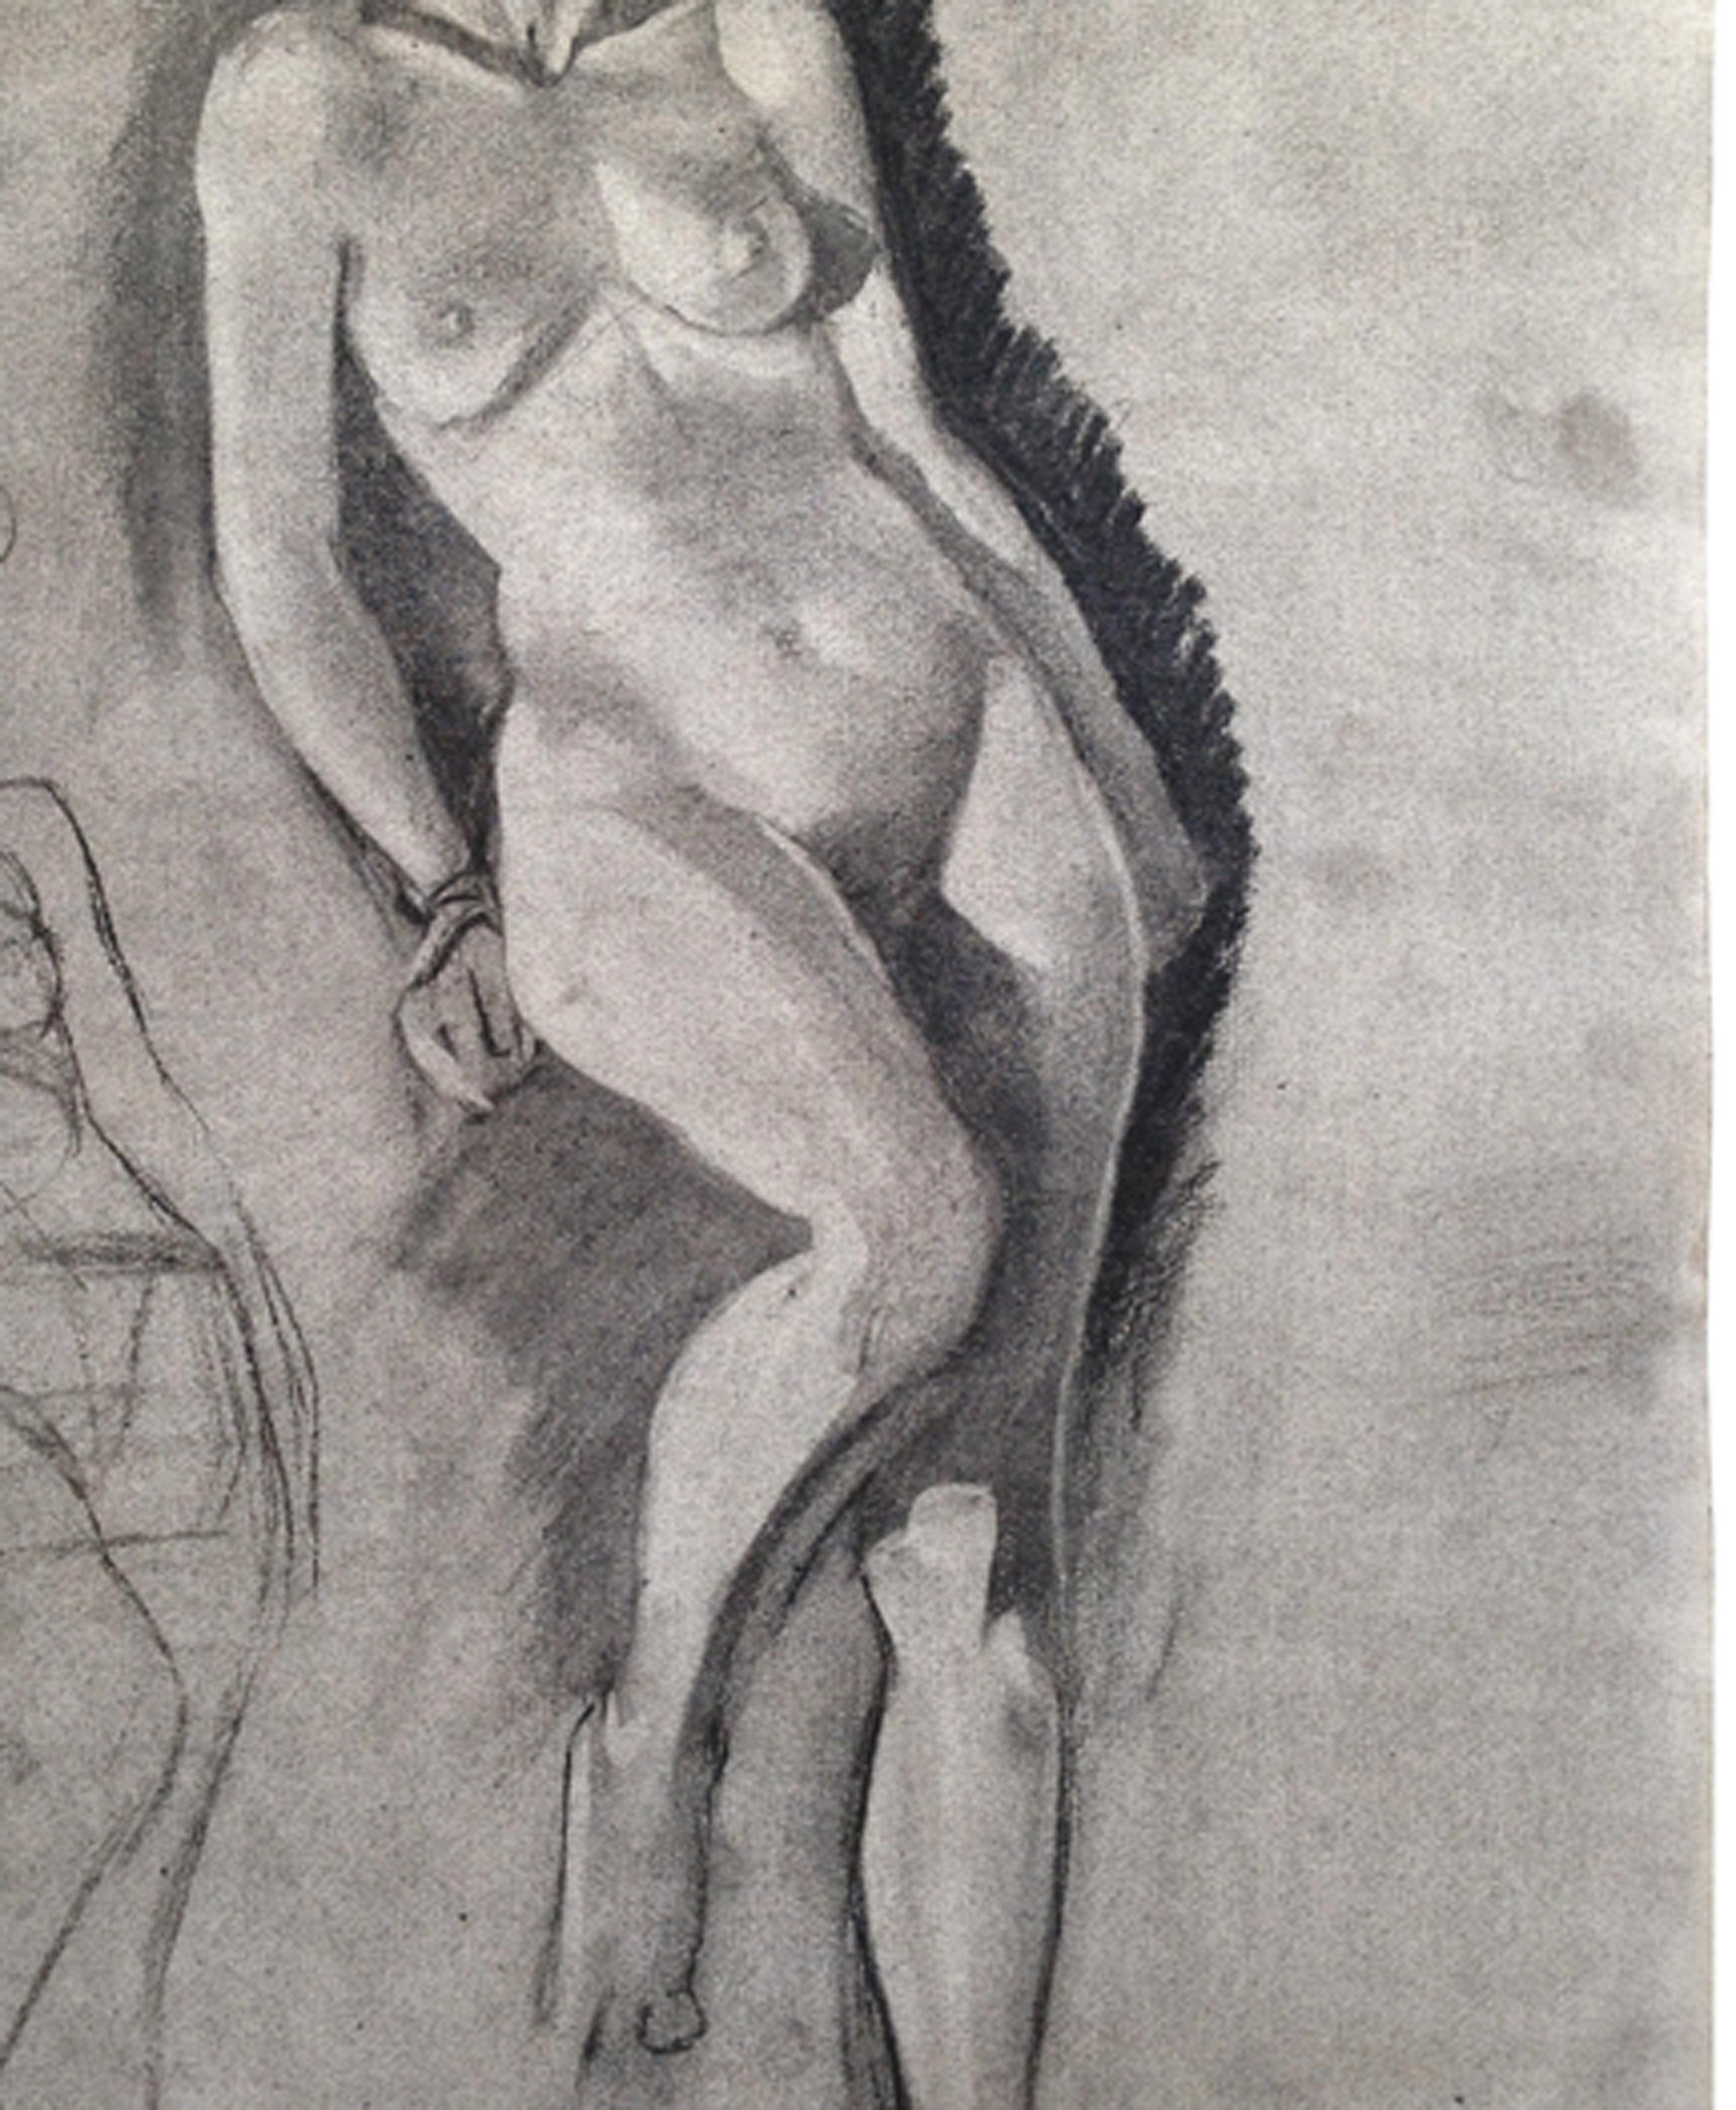 1940s Nude Figure Study  - Art by Unknown